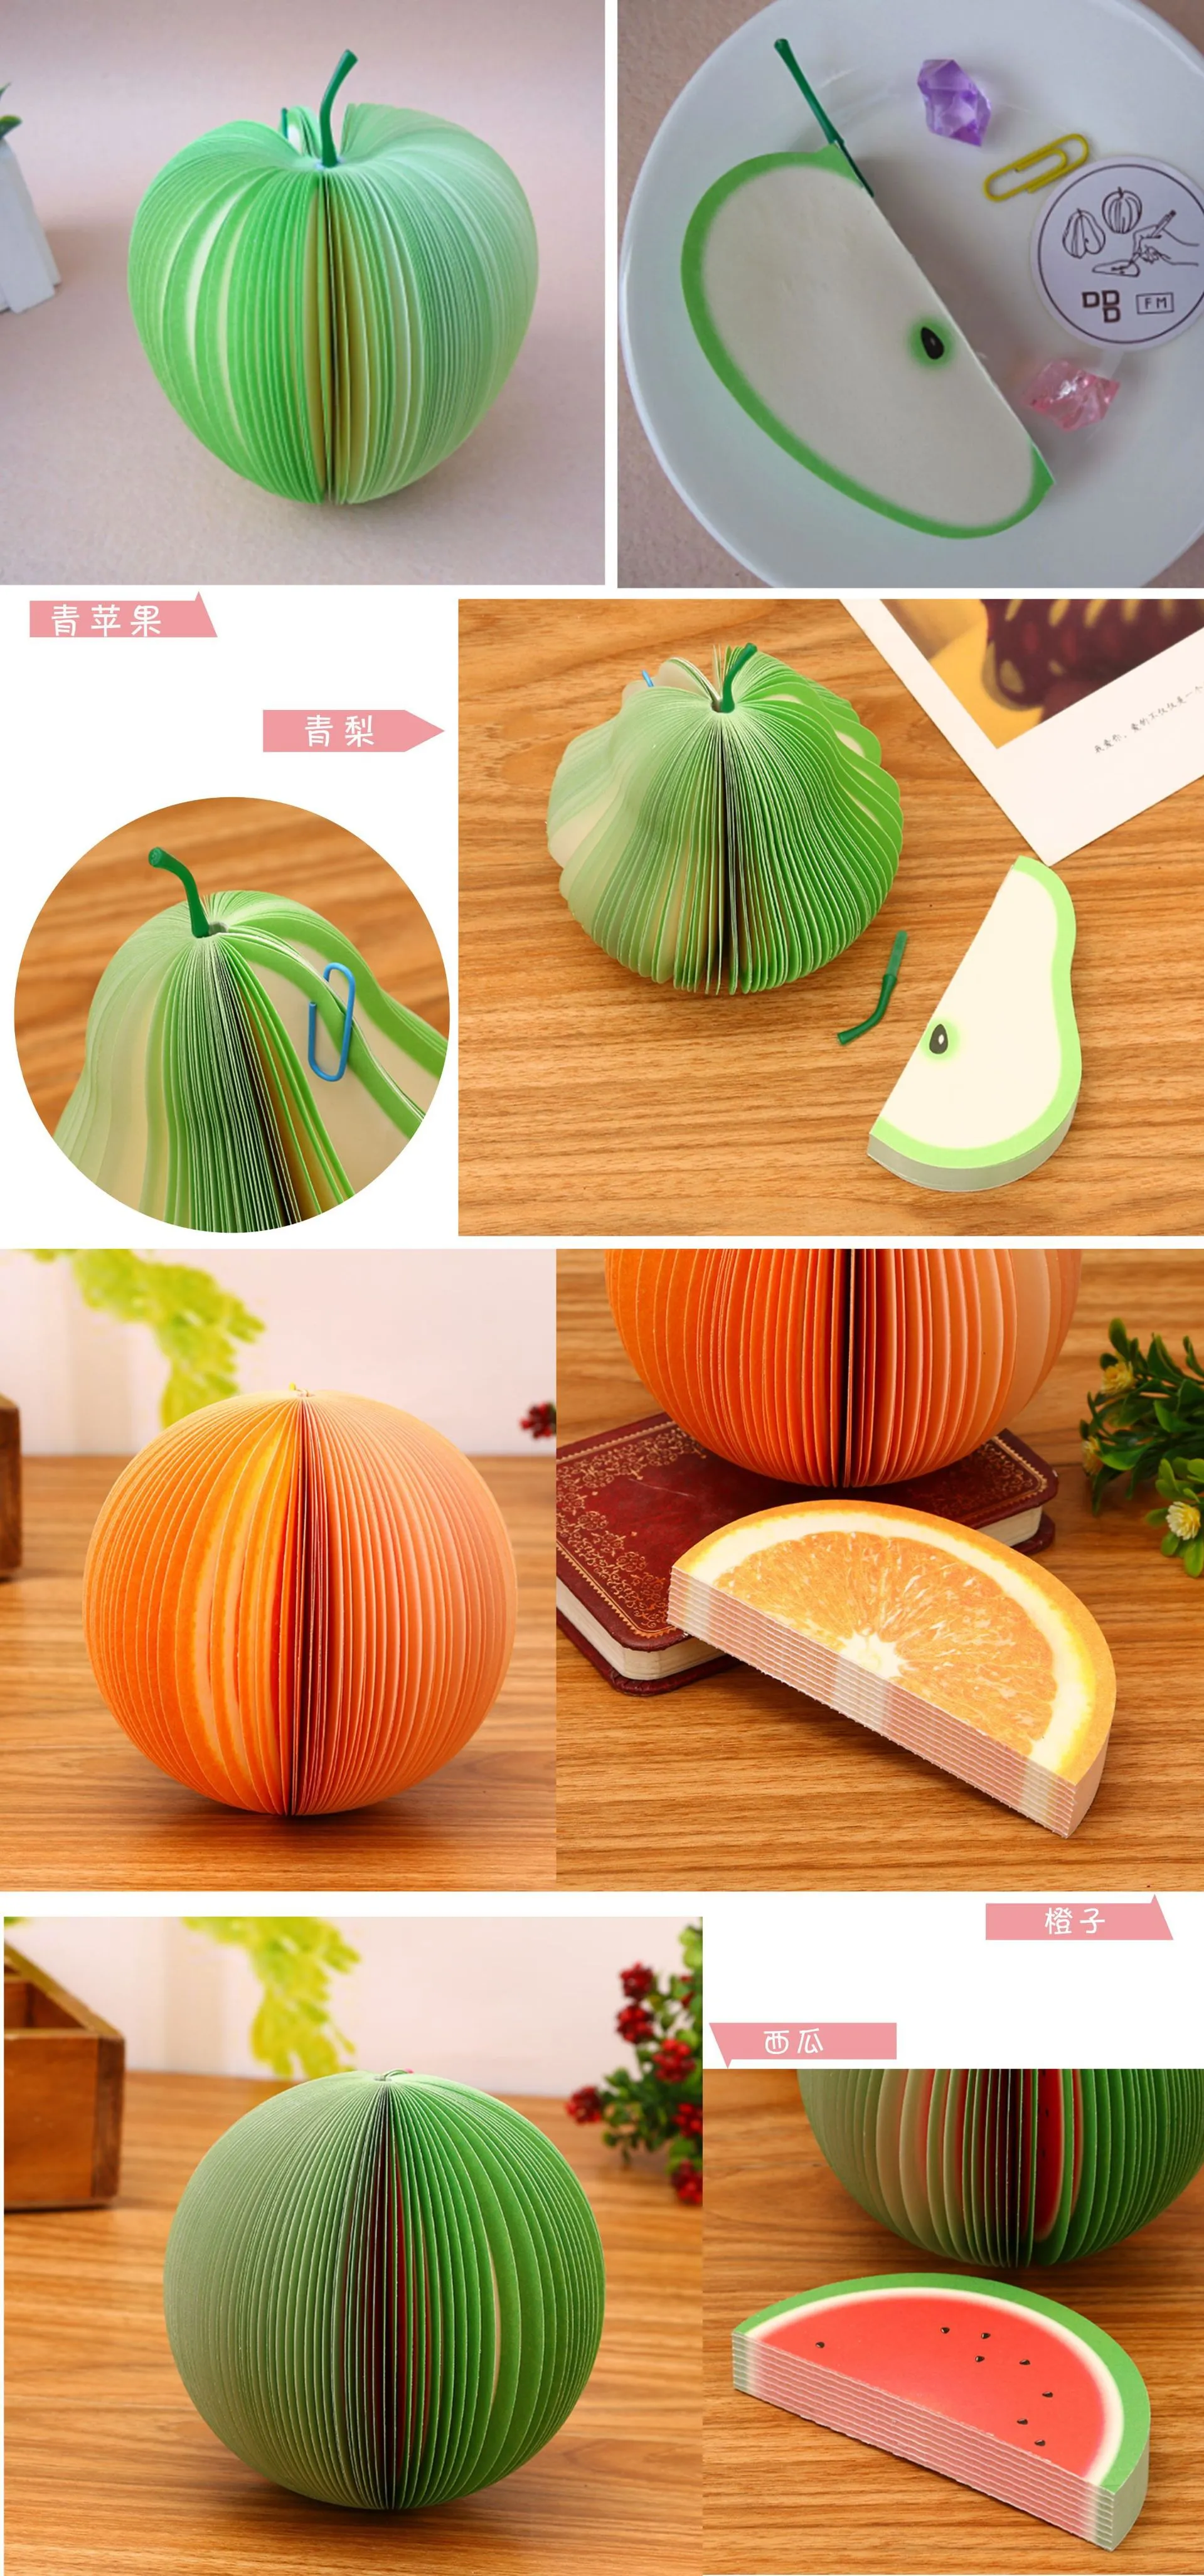 Party Favor Creative Fruit Shape Notes Paper Cute  Lemon Pear Stberry Memo Pad Sticky School Office Supply 0208